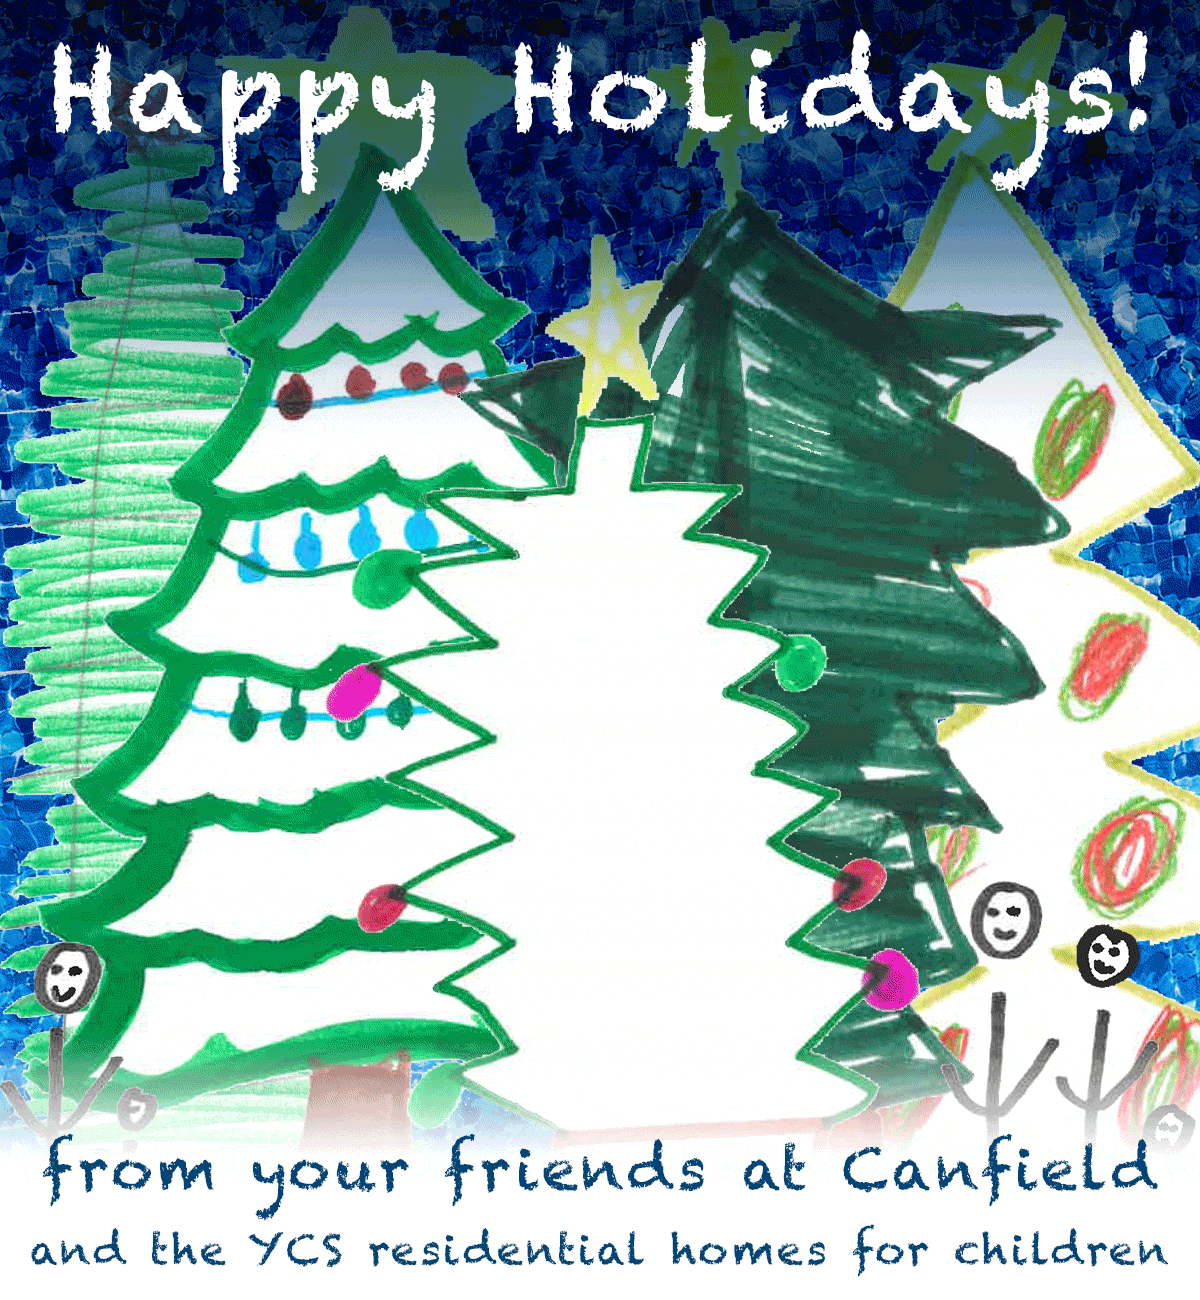 Happy Holidays from Canfield and YCS!